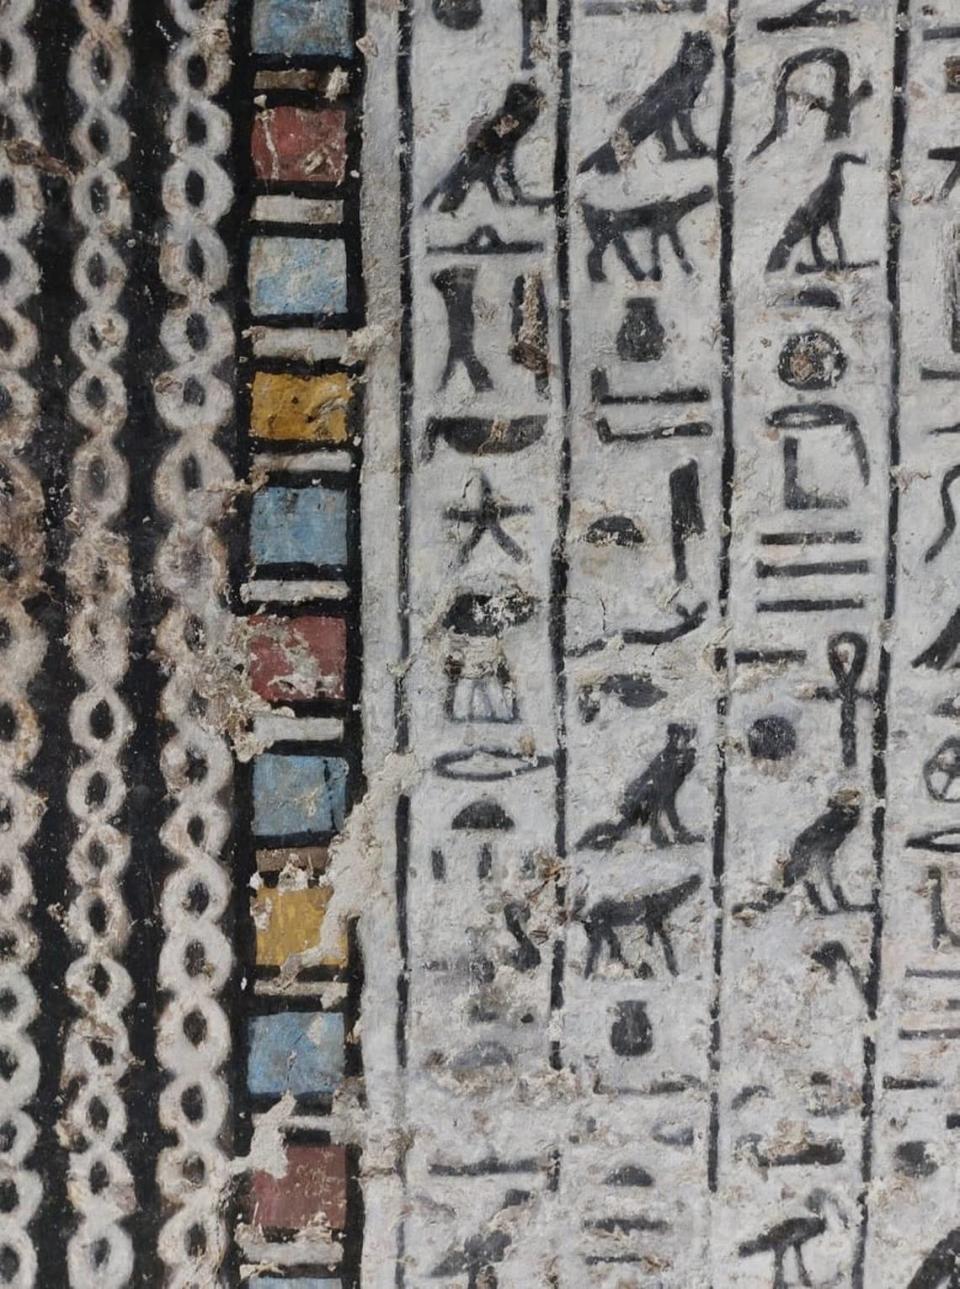 Some of the heiroglyphics painted in Meru’s burial chamber.